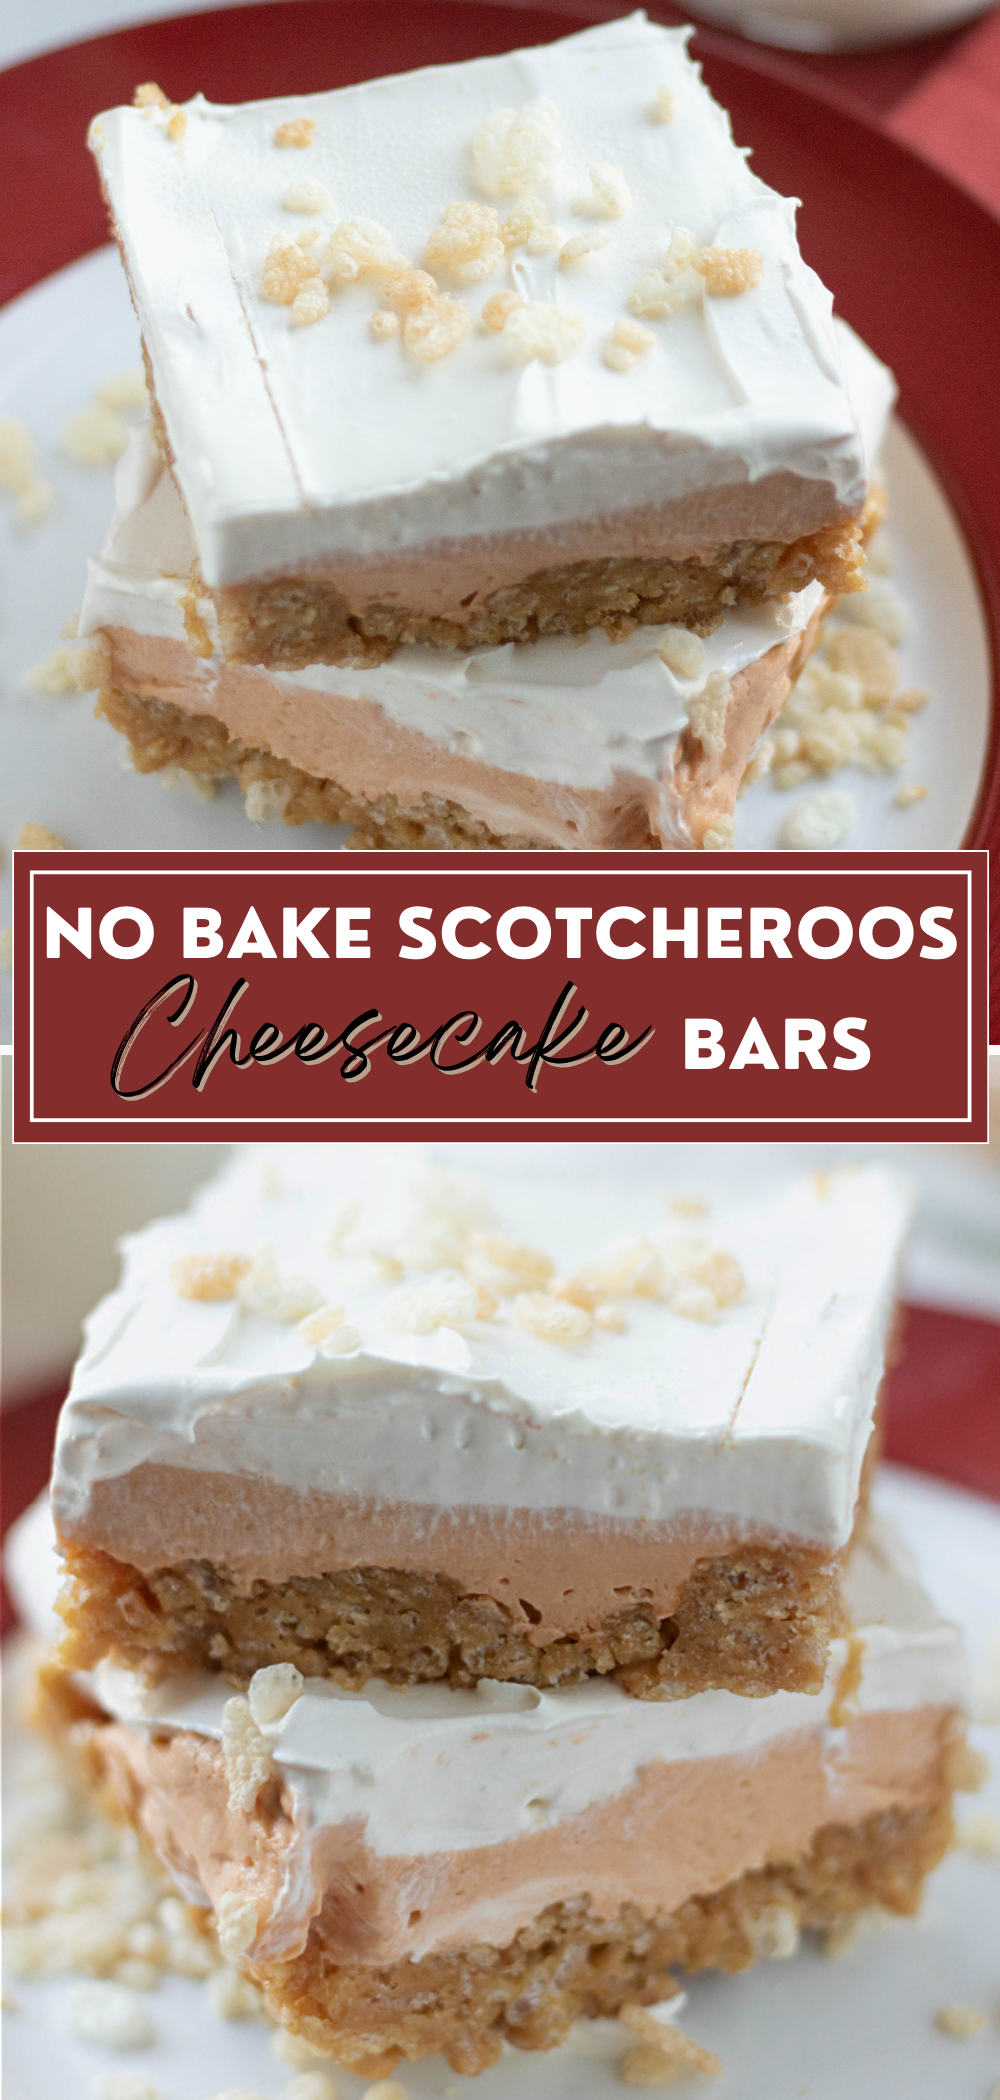 Enjoy the delicious layer of flavors in this easy no bake scotcheroos cheesecake bars! They are perfect for a simple weeknight dessert or potluck with friends, and will easily become a new favorite! This is an oldie but goodie retro dessert where the original recipe was introduced on the back of Rice Krispies cereal boxes. They are so good and the kids and whole family will love it! via @skinnydesserts